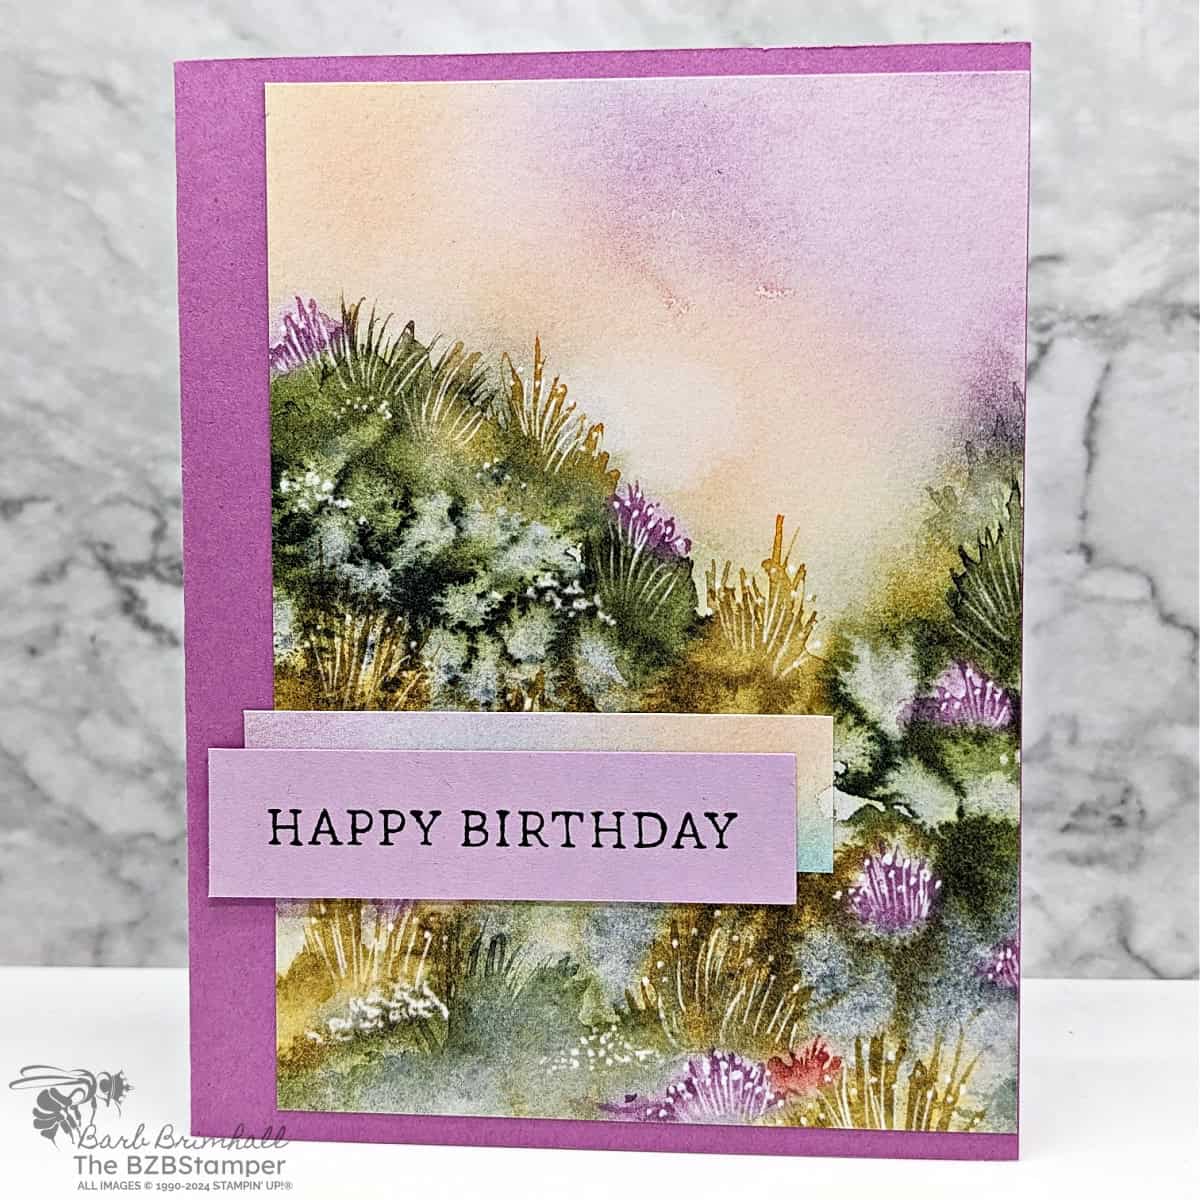 5 Minute Birthday Card Using Card Sketch 4 with nature background paper and a Happy Birthday sentiment.